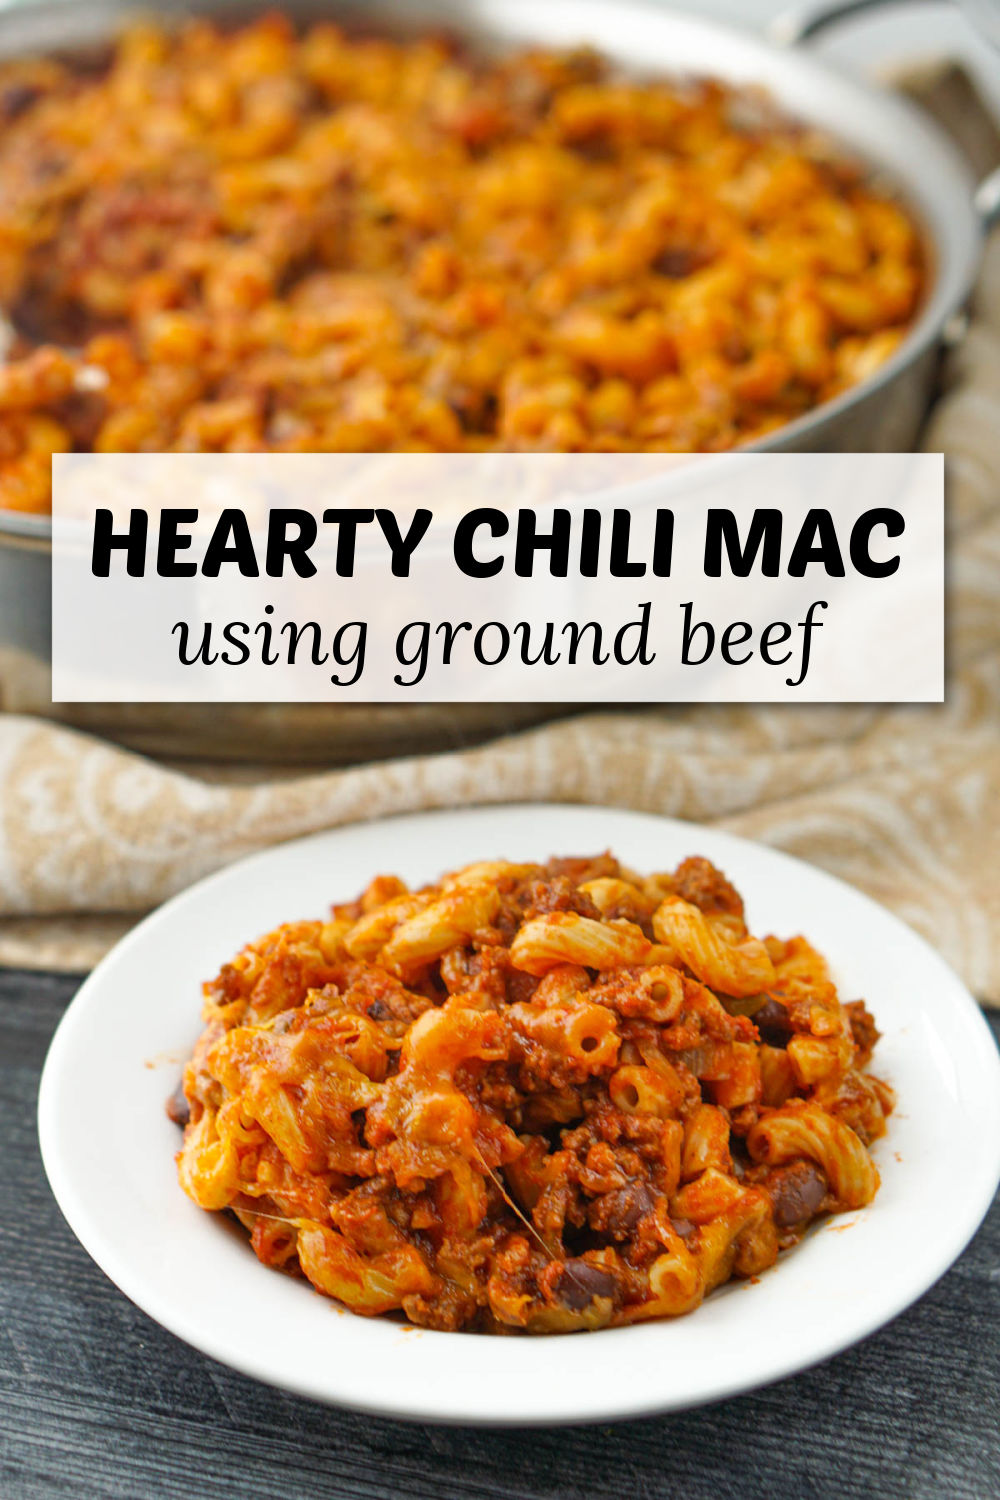 pan and dish with chili Mac and text